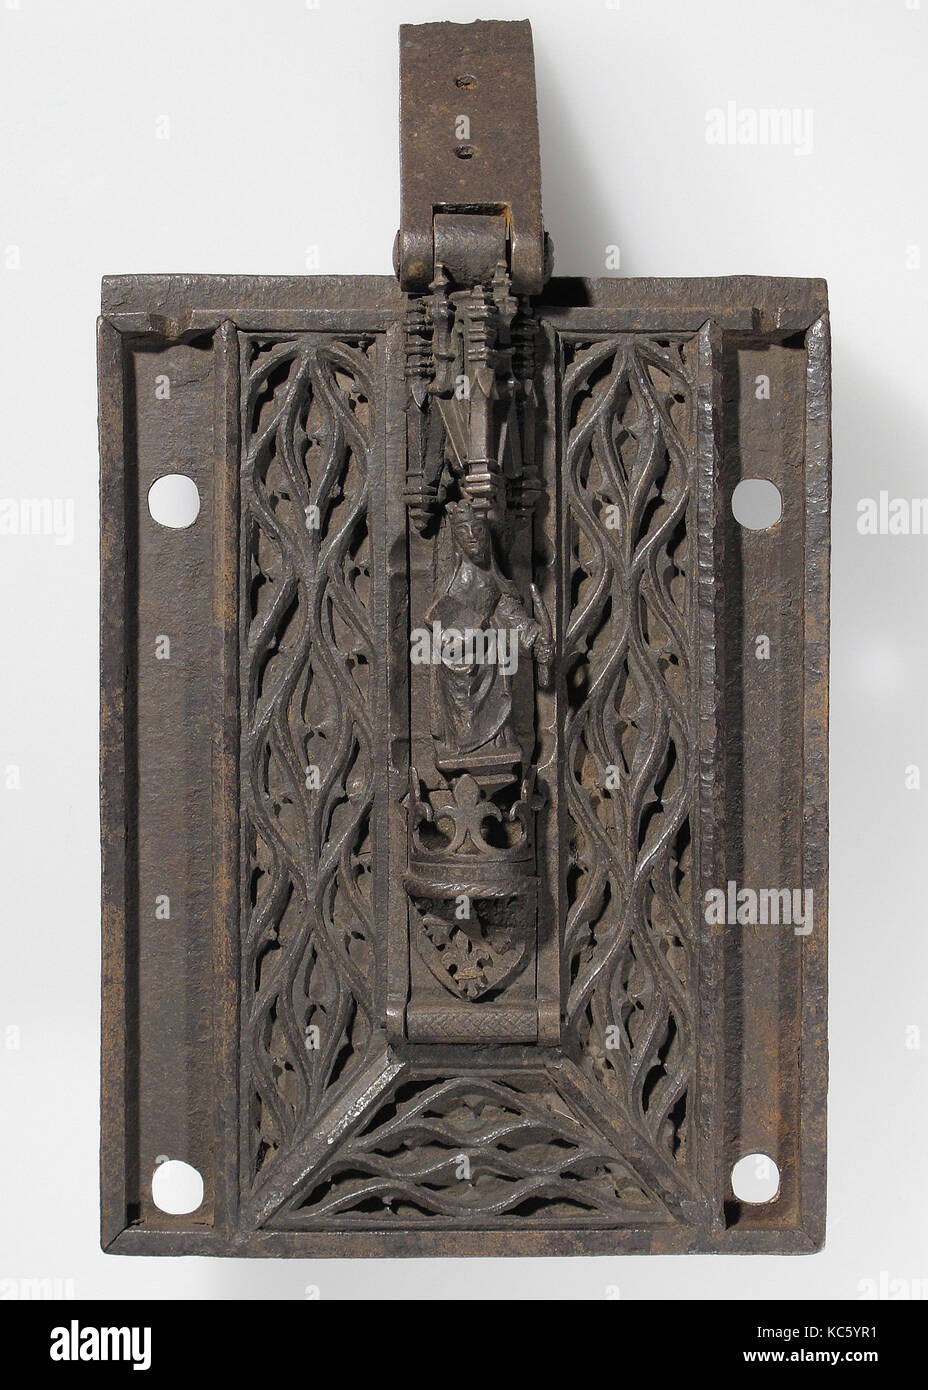 Lock, 15th–16th century, French, Iron, Overall (a.): 7 1/2 x 5 1/2 in. (19.1 x 14 cm), Metalwork-Iron, The decoration of Gothic Stock Photo